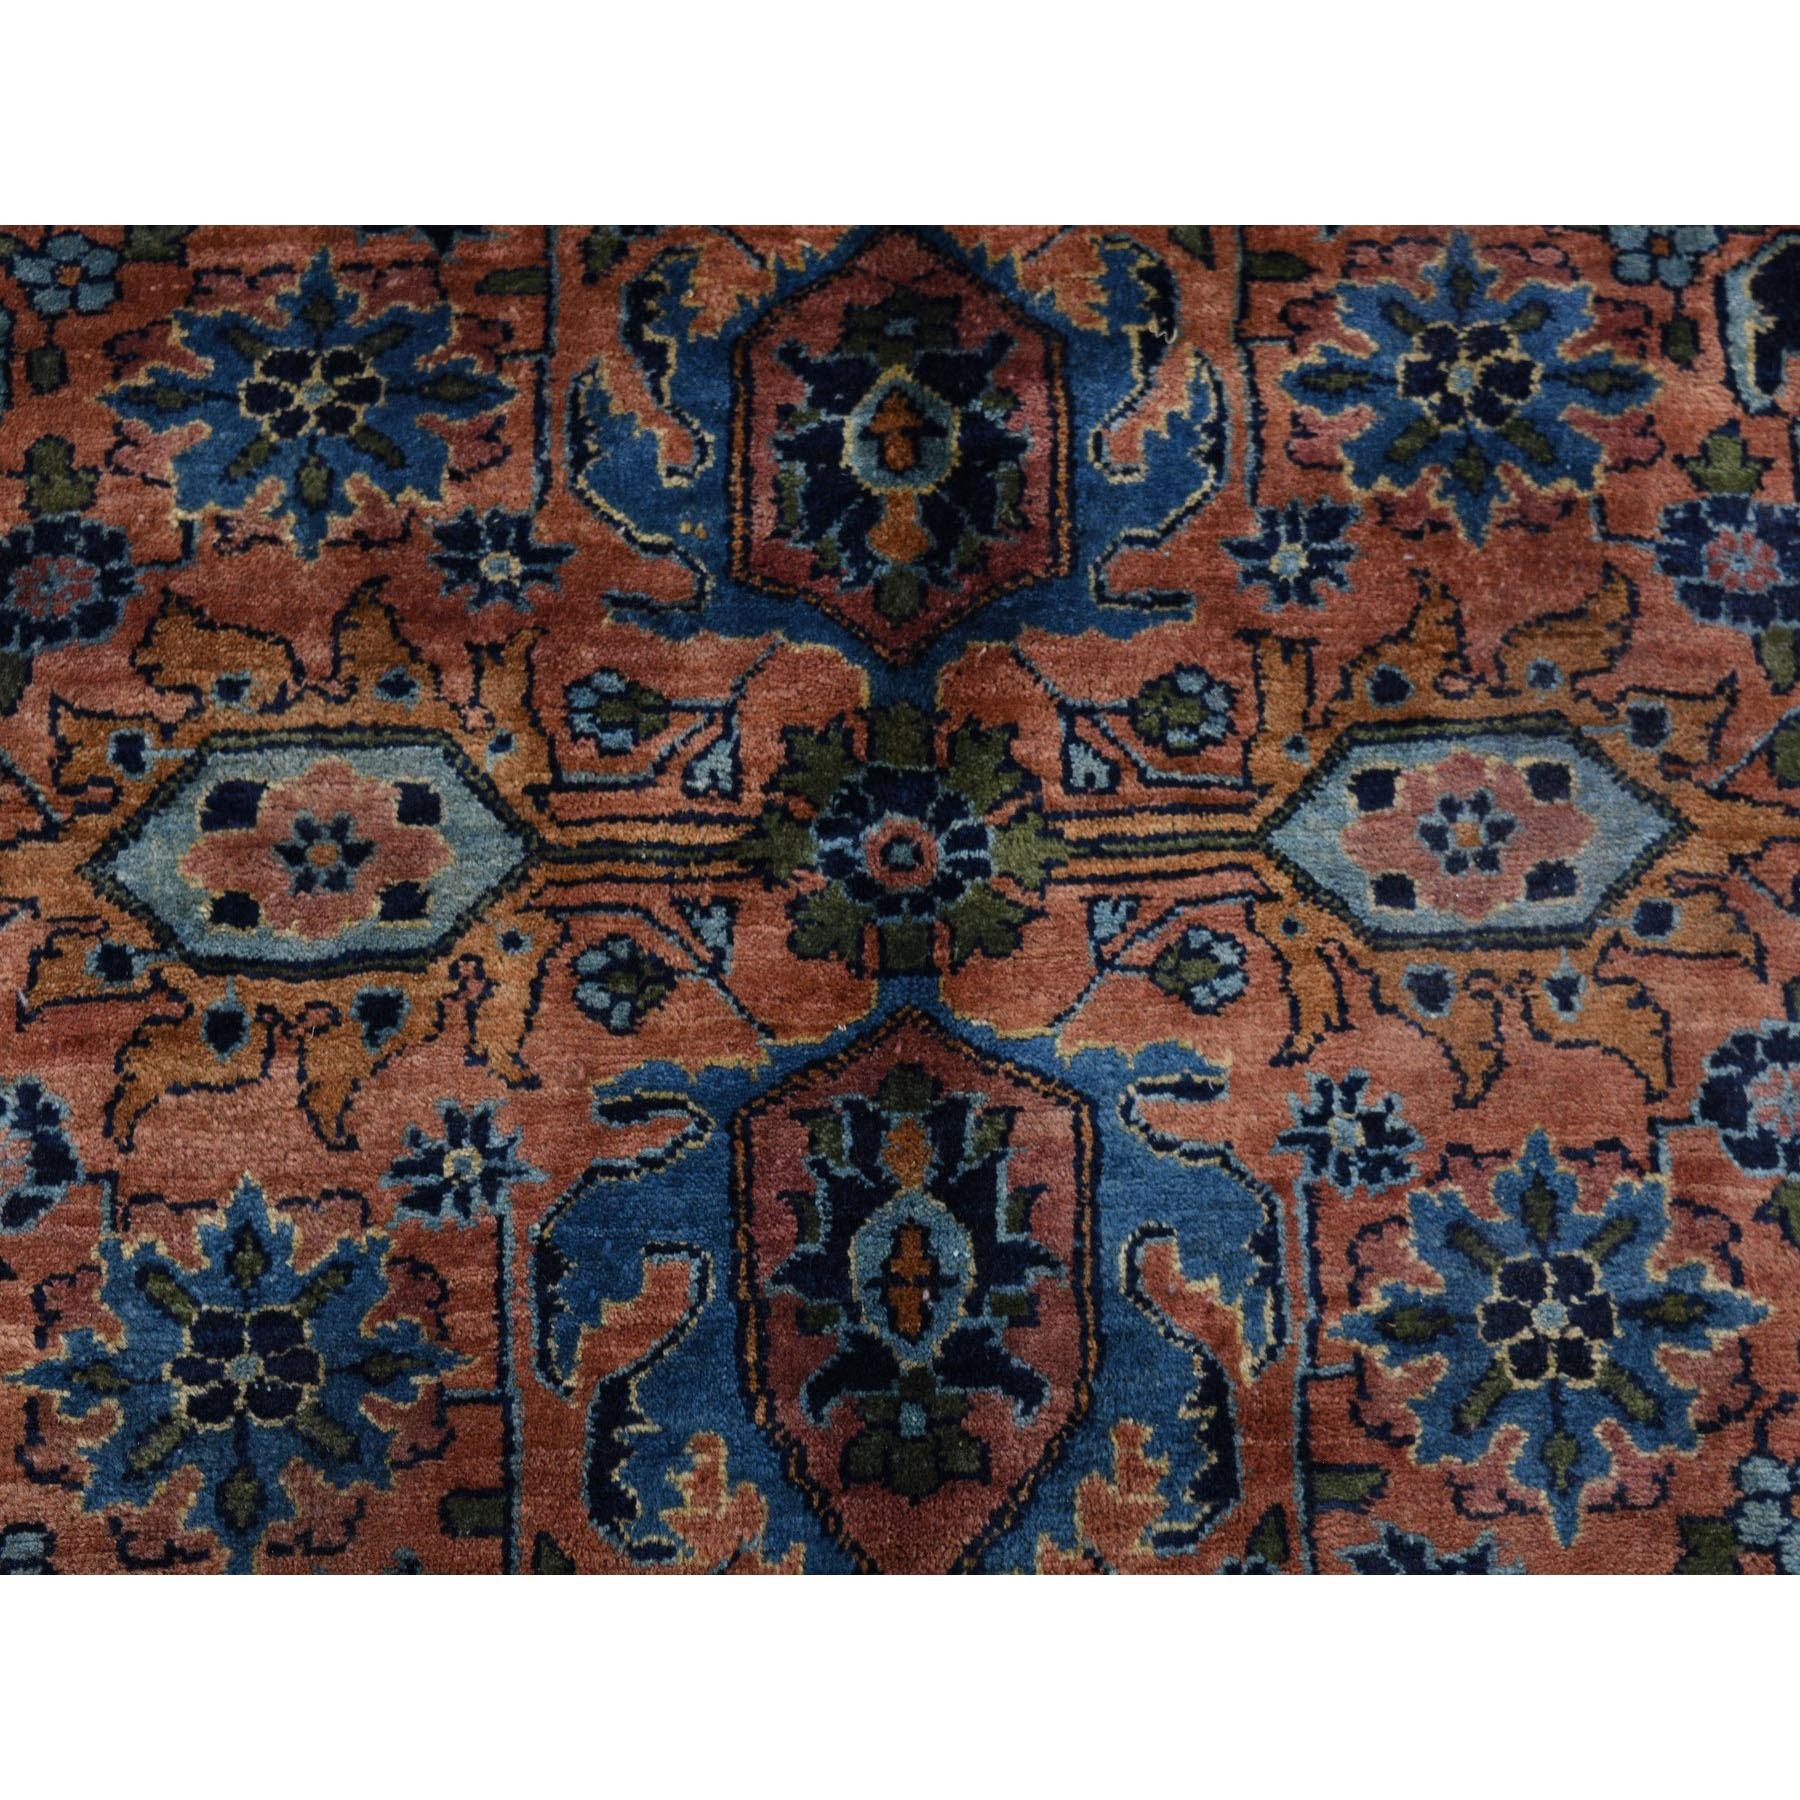 Antique Persian Bijar Mint Condition Full Pile Hand Knotted Wool Oriental Rug 2